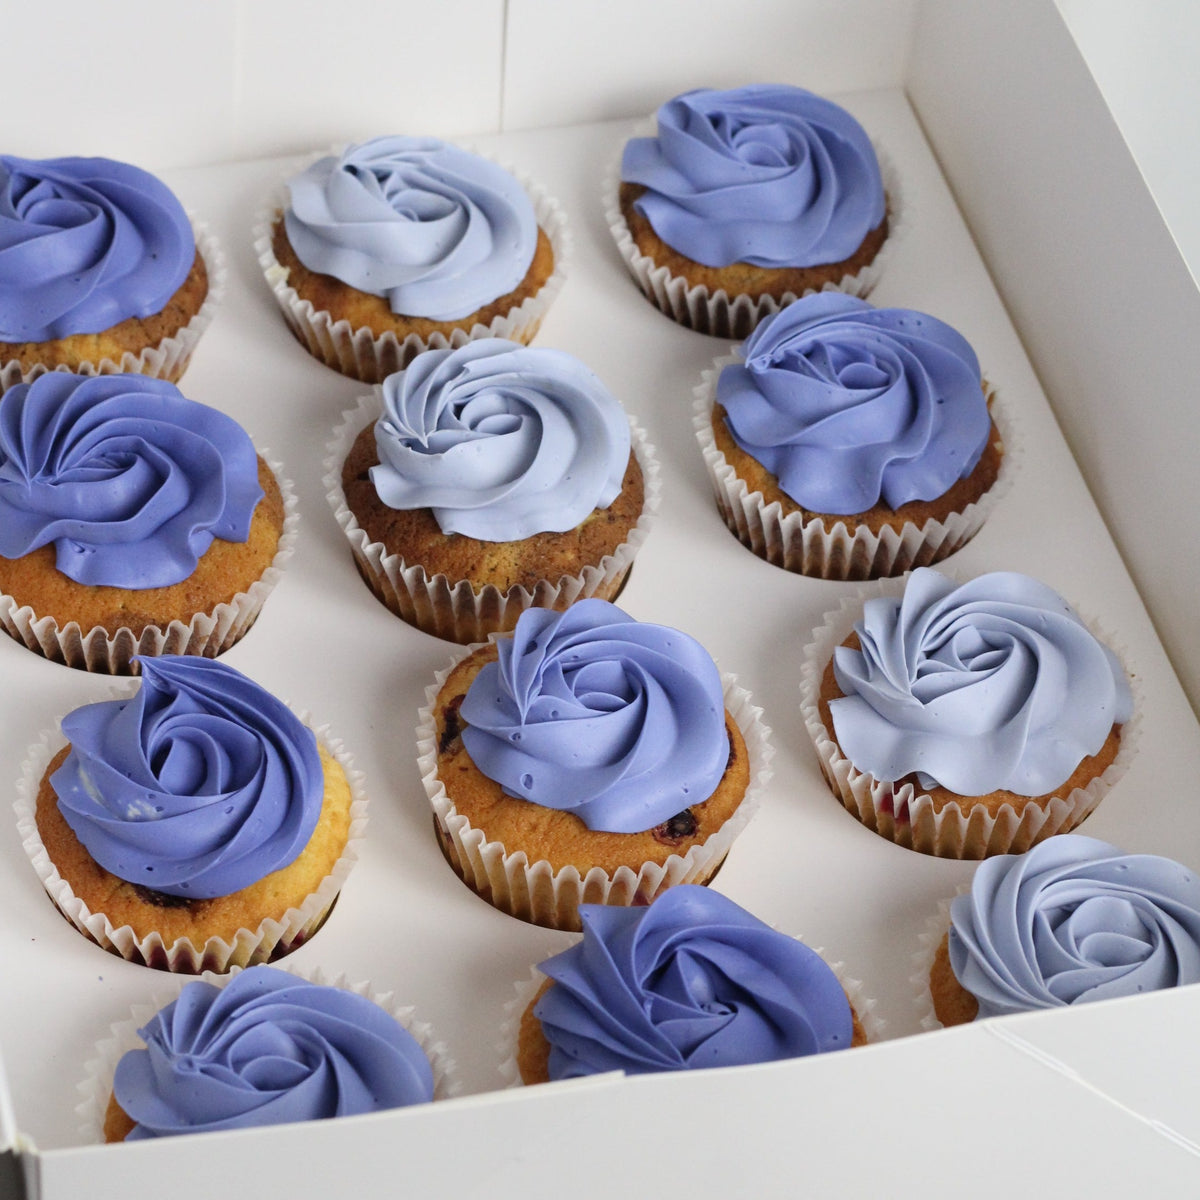 Cupcakes - our smallest sweet treats with fun blue/ simple rosette buttercream piping!